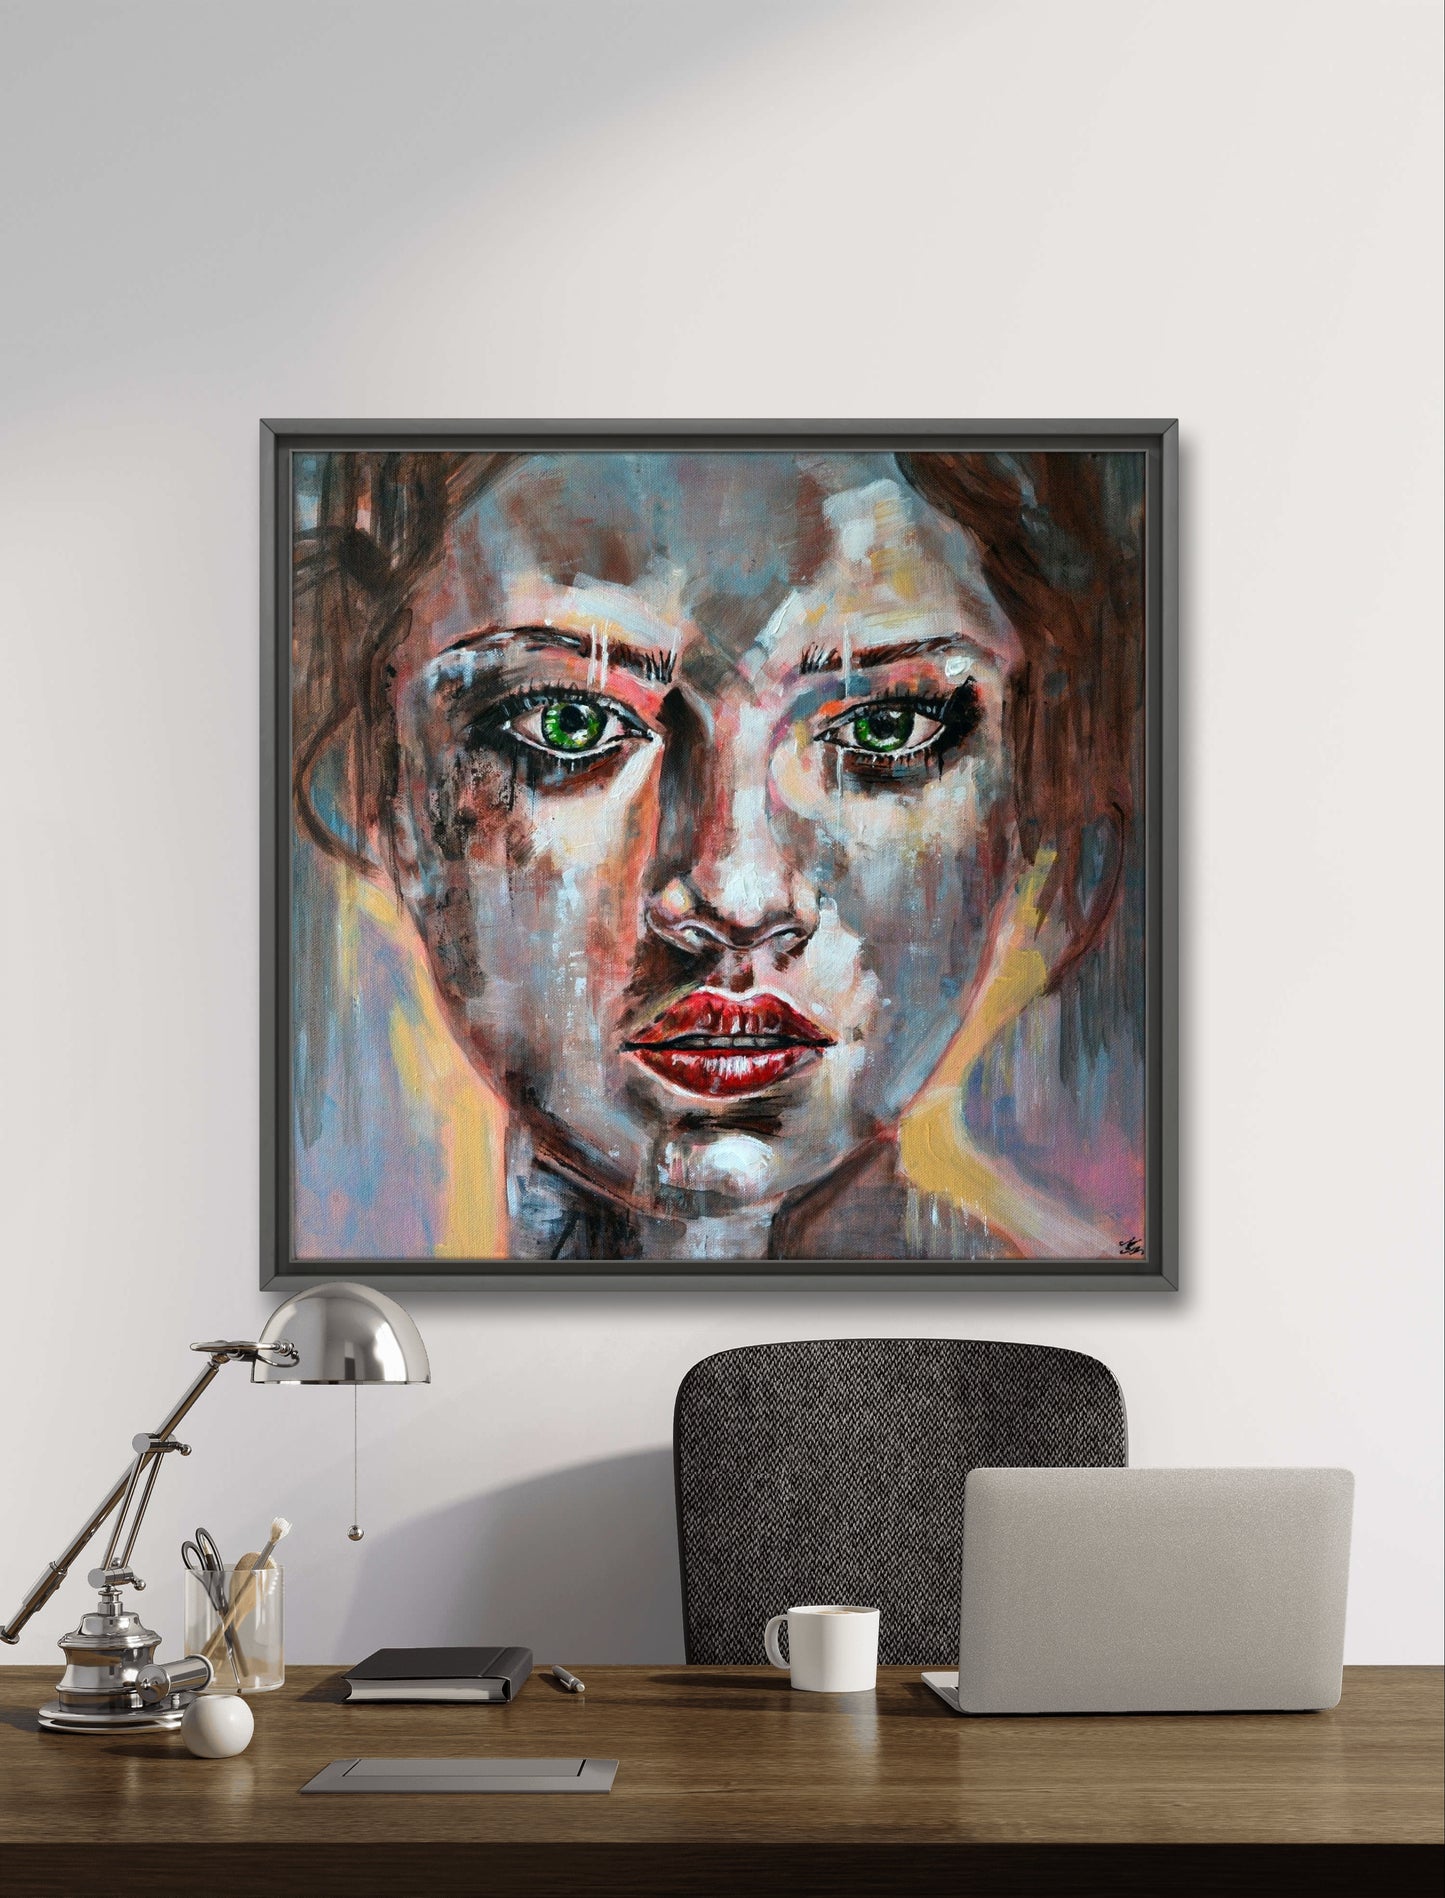 Modern abstract canvas art 'Shining' with dynamic colors and brush strokes, by Misty Lady.